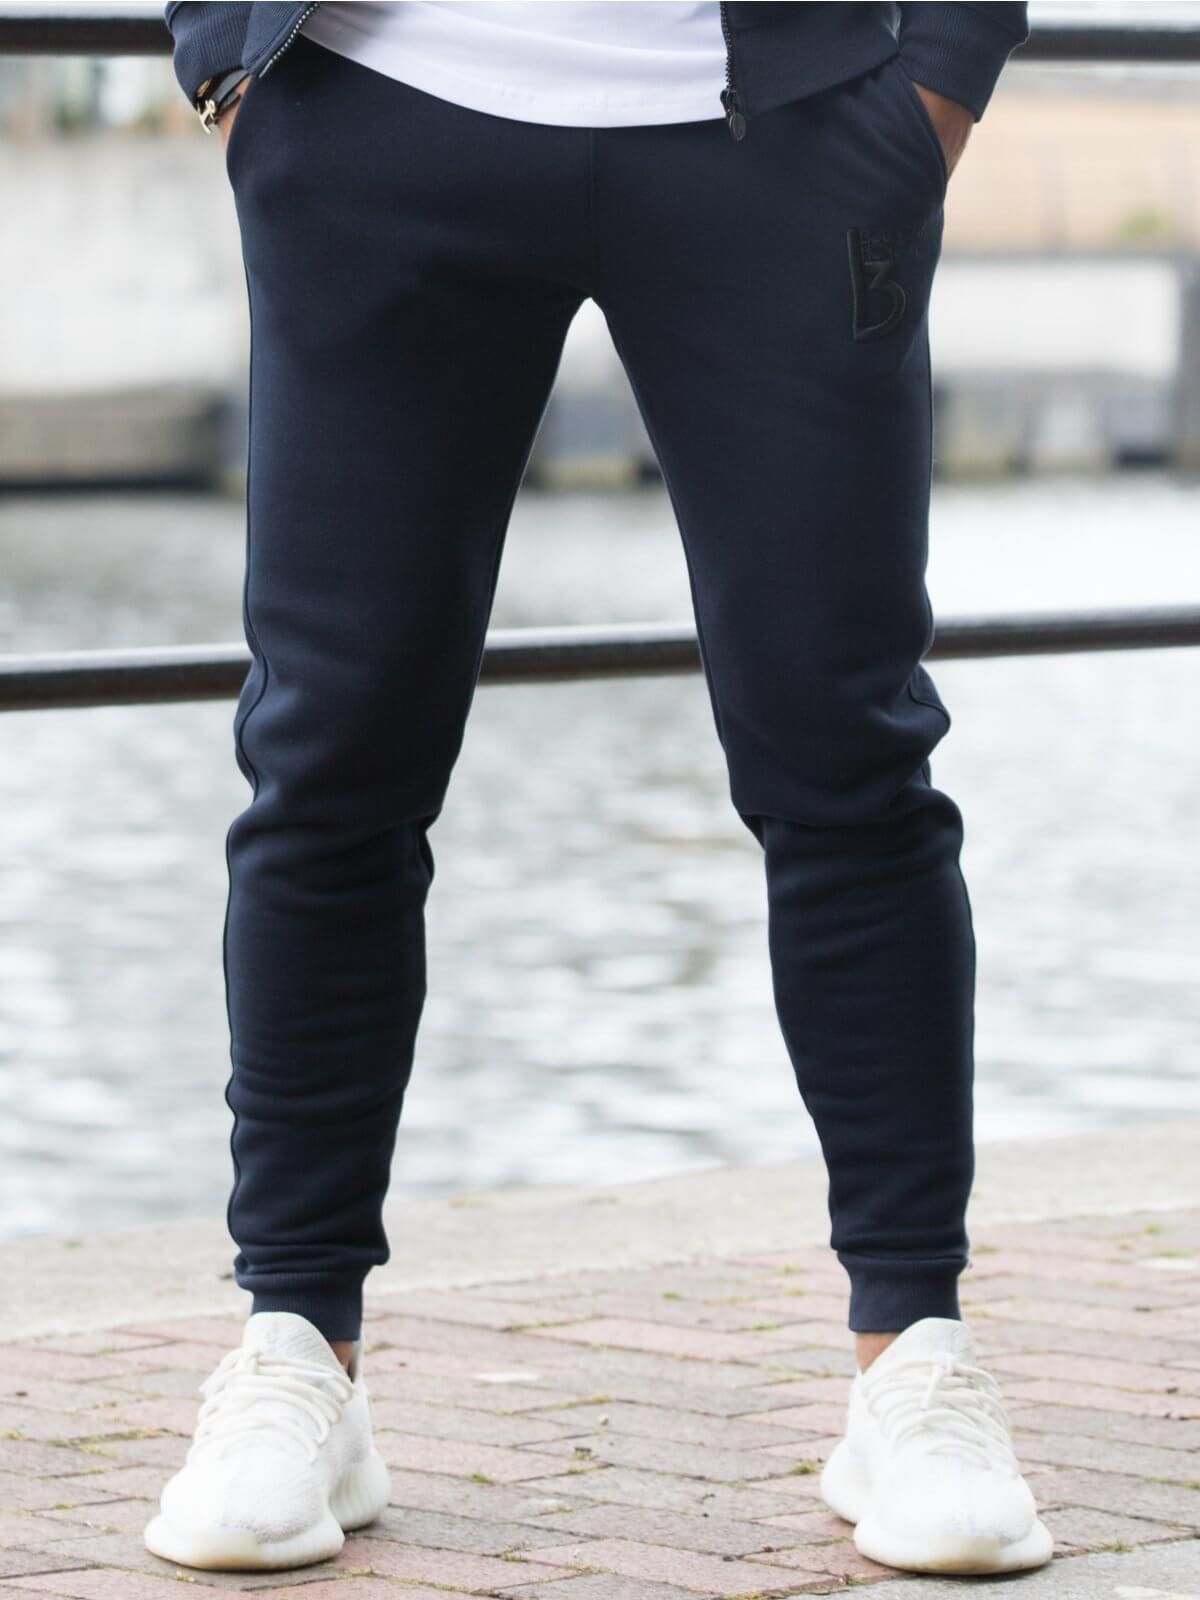  Bound By Honour Radiate Tracksuit Bottoms are ideal for casual everyday wear or in the gym. Crafted from cotton and polyester. The tracksuit bottom has been detailed with a signature design and a BBH embroidery on leg. Matching tracksuit Hoodie available.